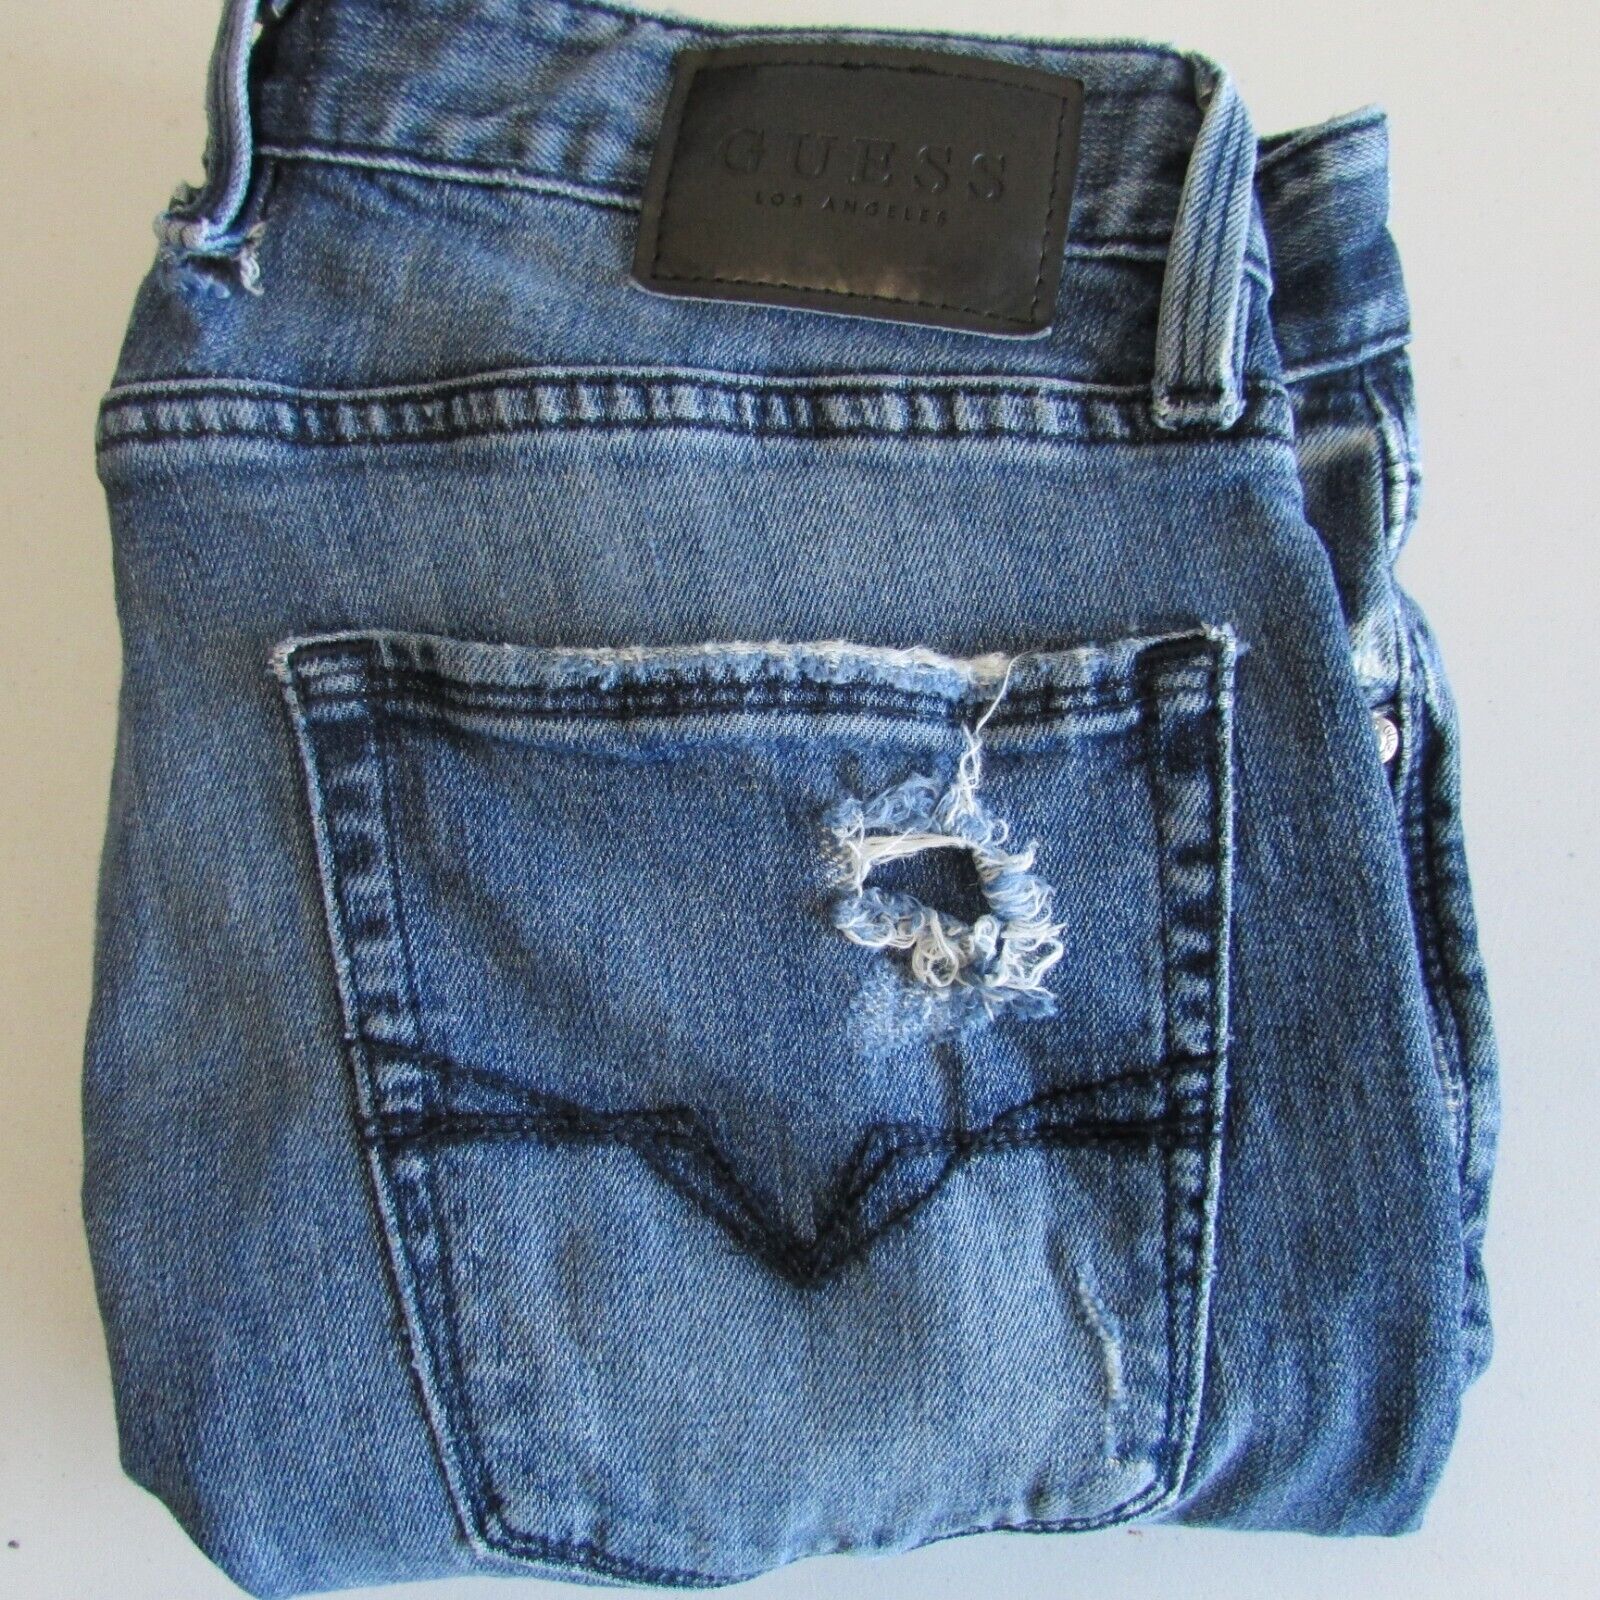 Guess distressed jeans 33x30 blue denim ripped lots of holes slim straight zip